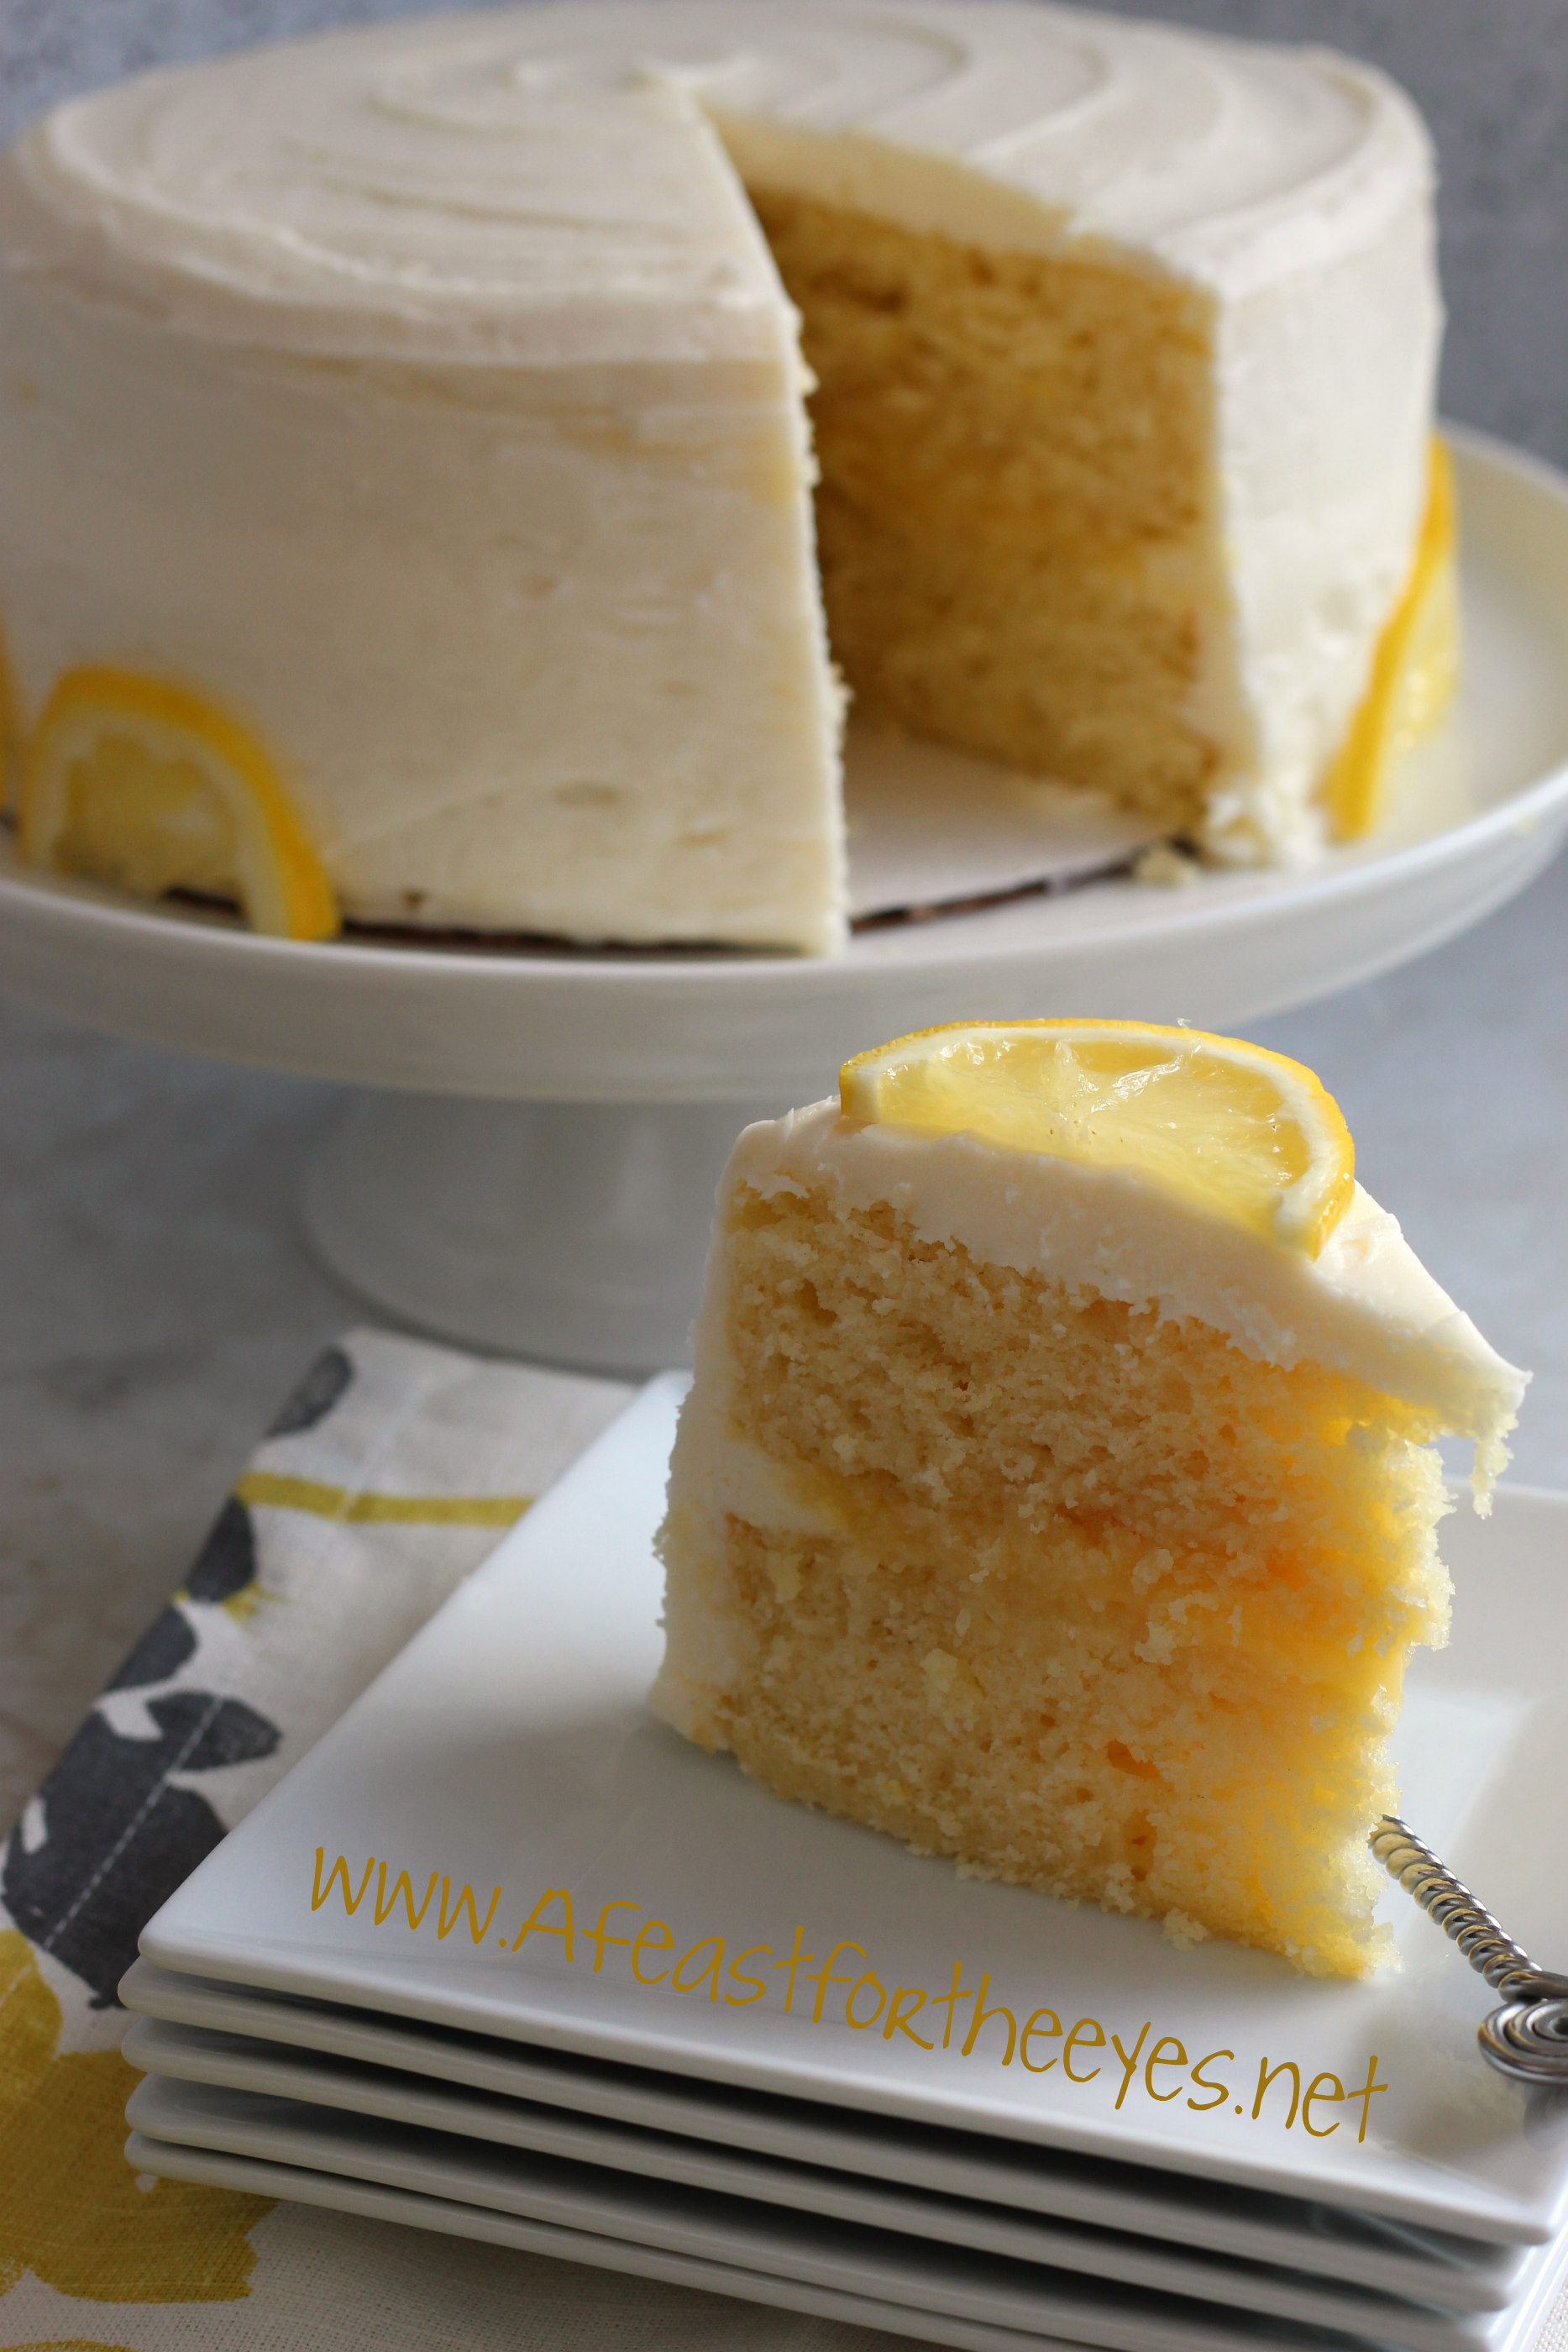 Lemon Buttermilk Layer Cake With Lemon Curd And Cream Cheese Frosting